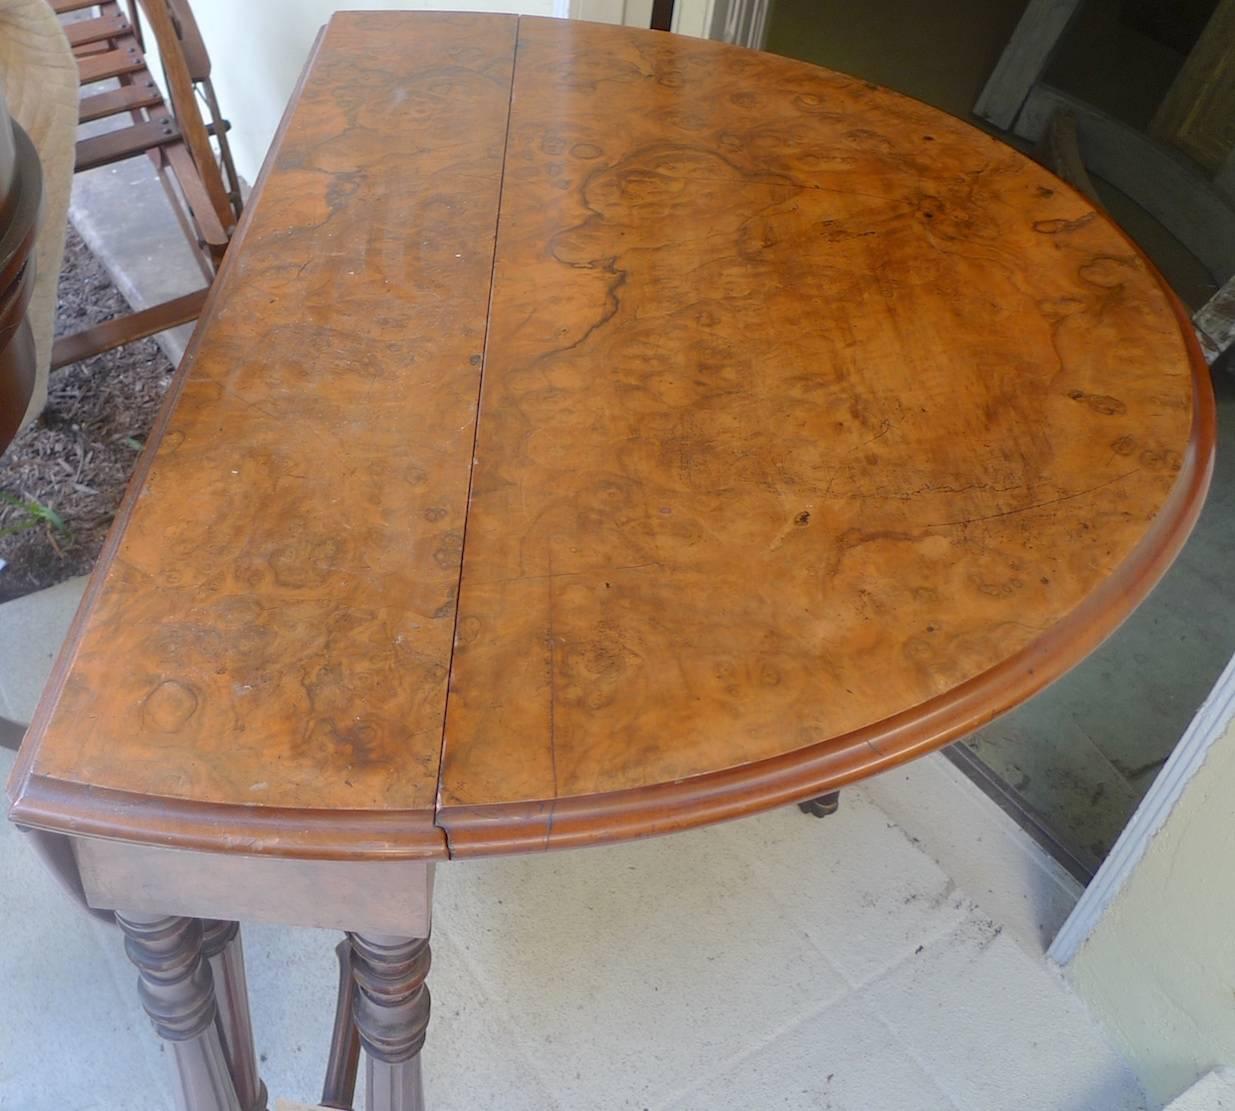 English 19th century burl walnut top, drop-leaf table with carved legs on wheels.